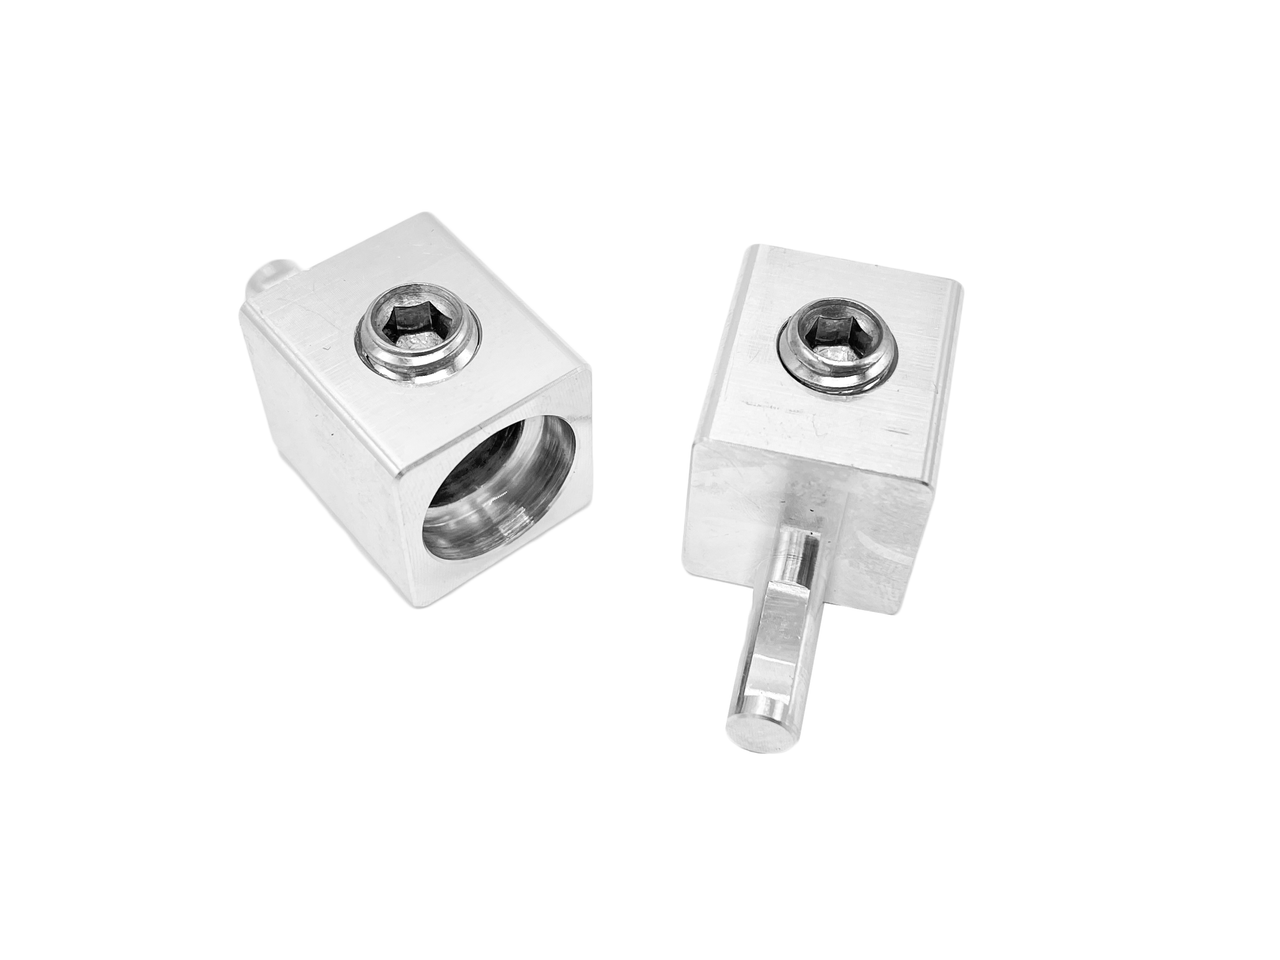 SMD Single Cable Adapter Block - 1 x 8AWG to 1 x 4AWG (1 Adaptor)